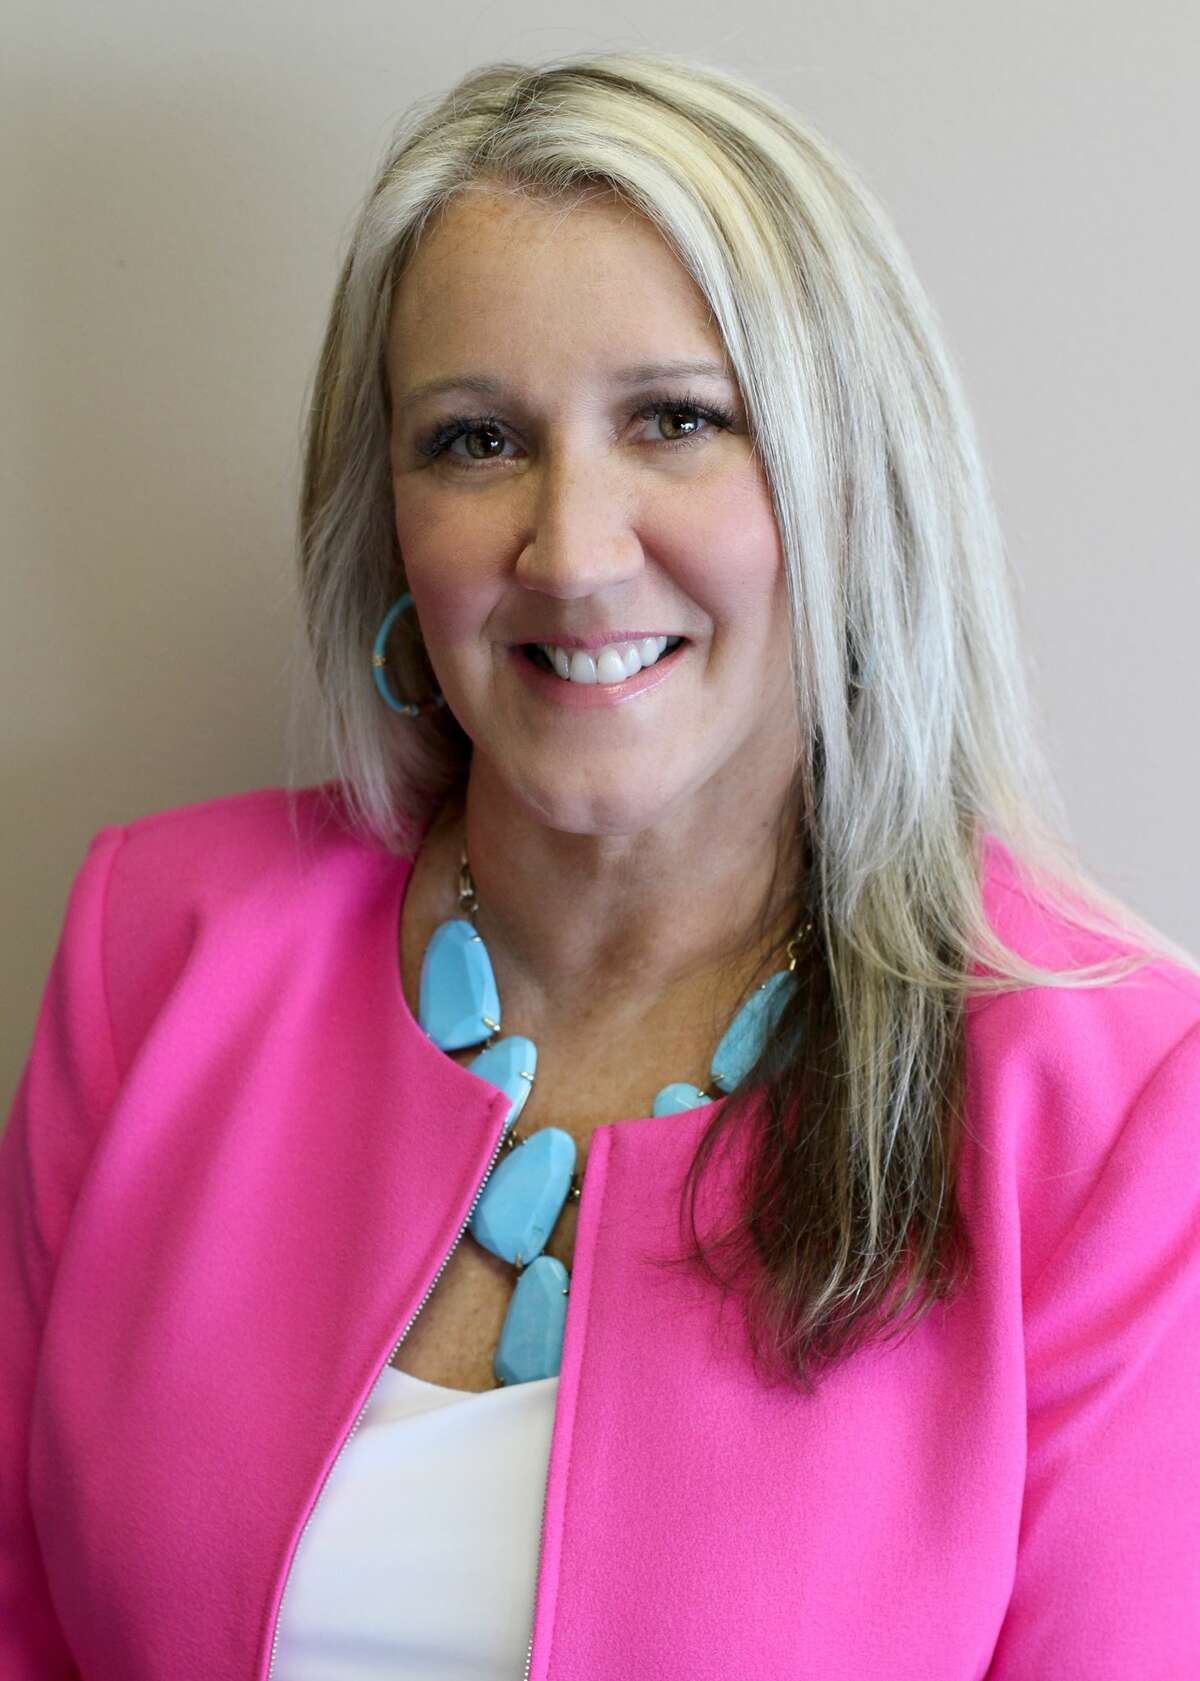 April Maggio has joined Corestaff Services as regional sales practice director for the Houston market.